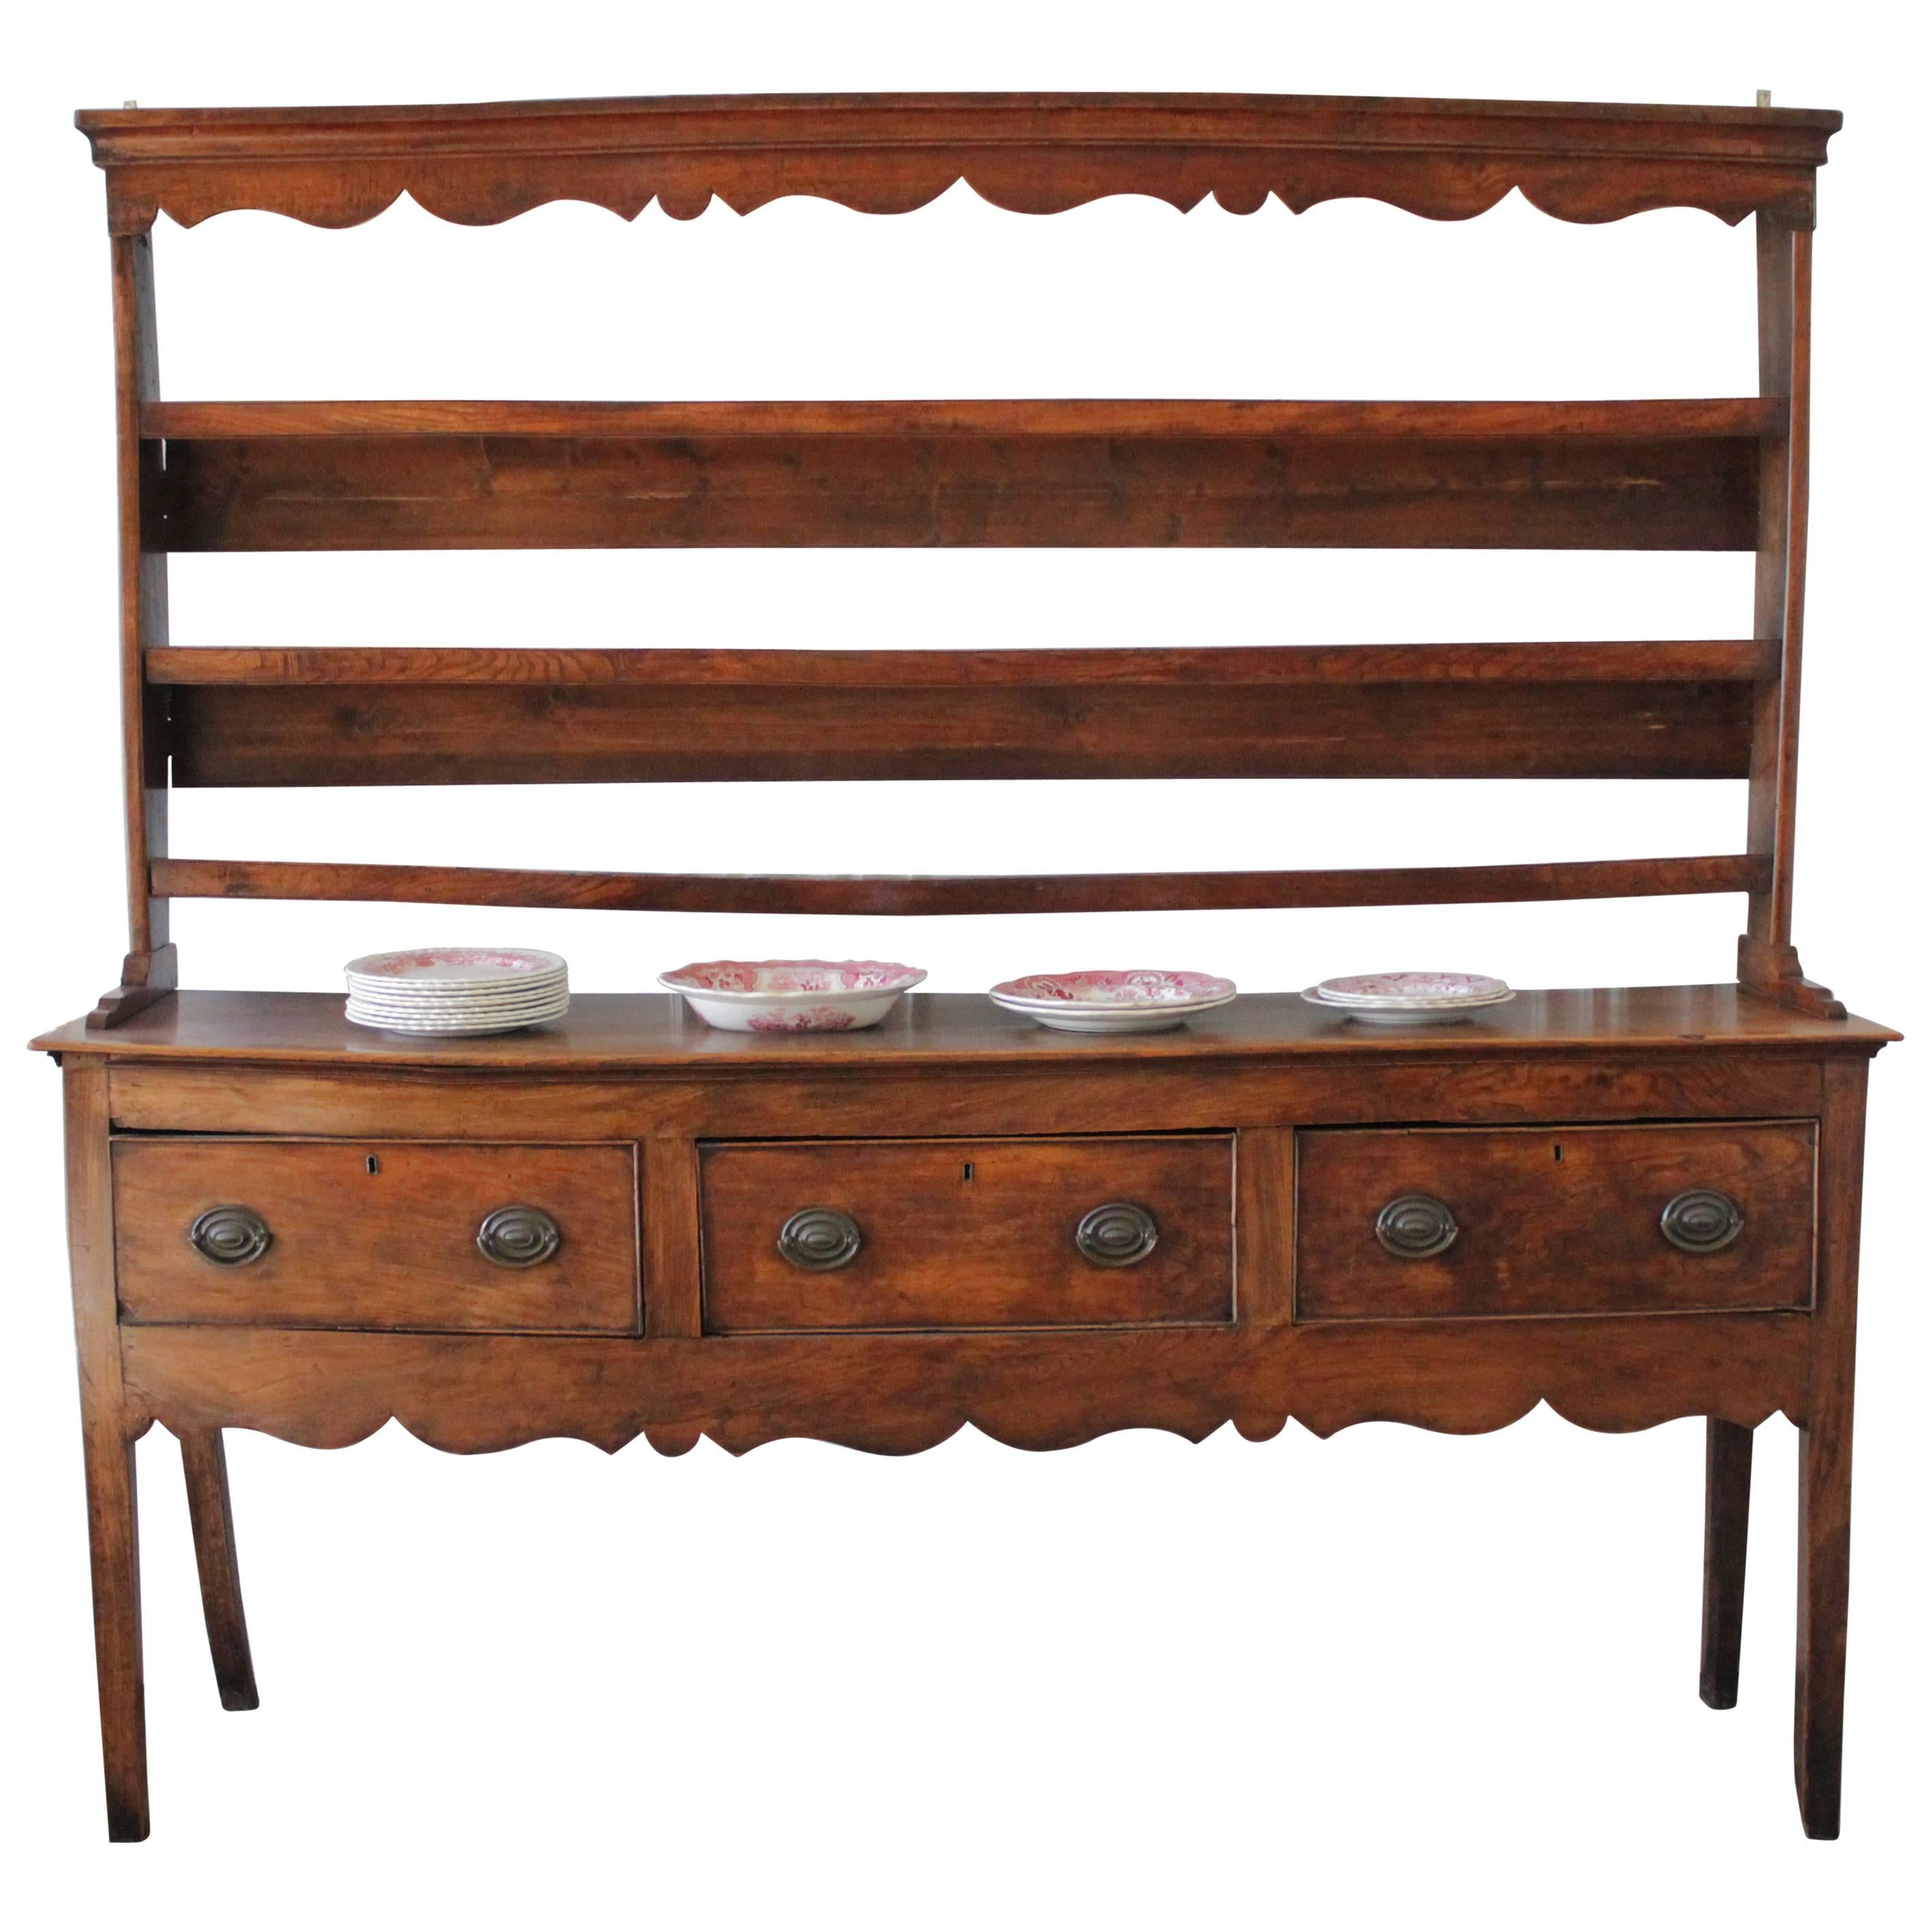 Georgian Style Country French Sideboard with Plate Rack